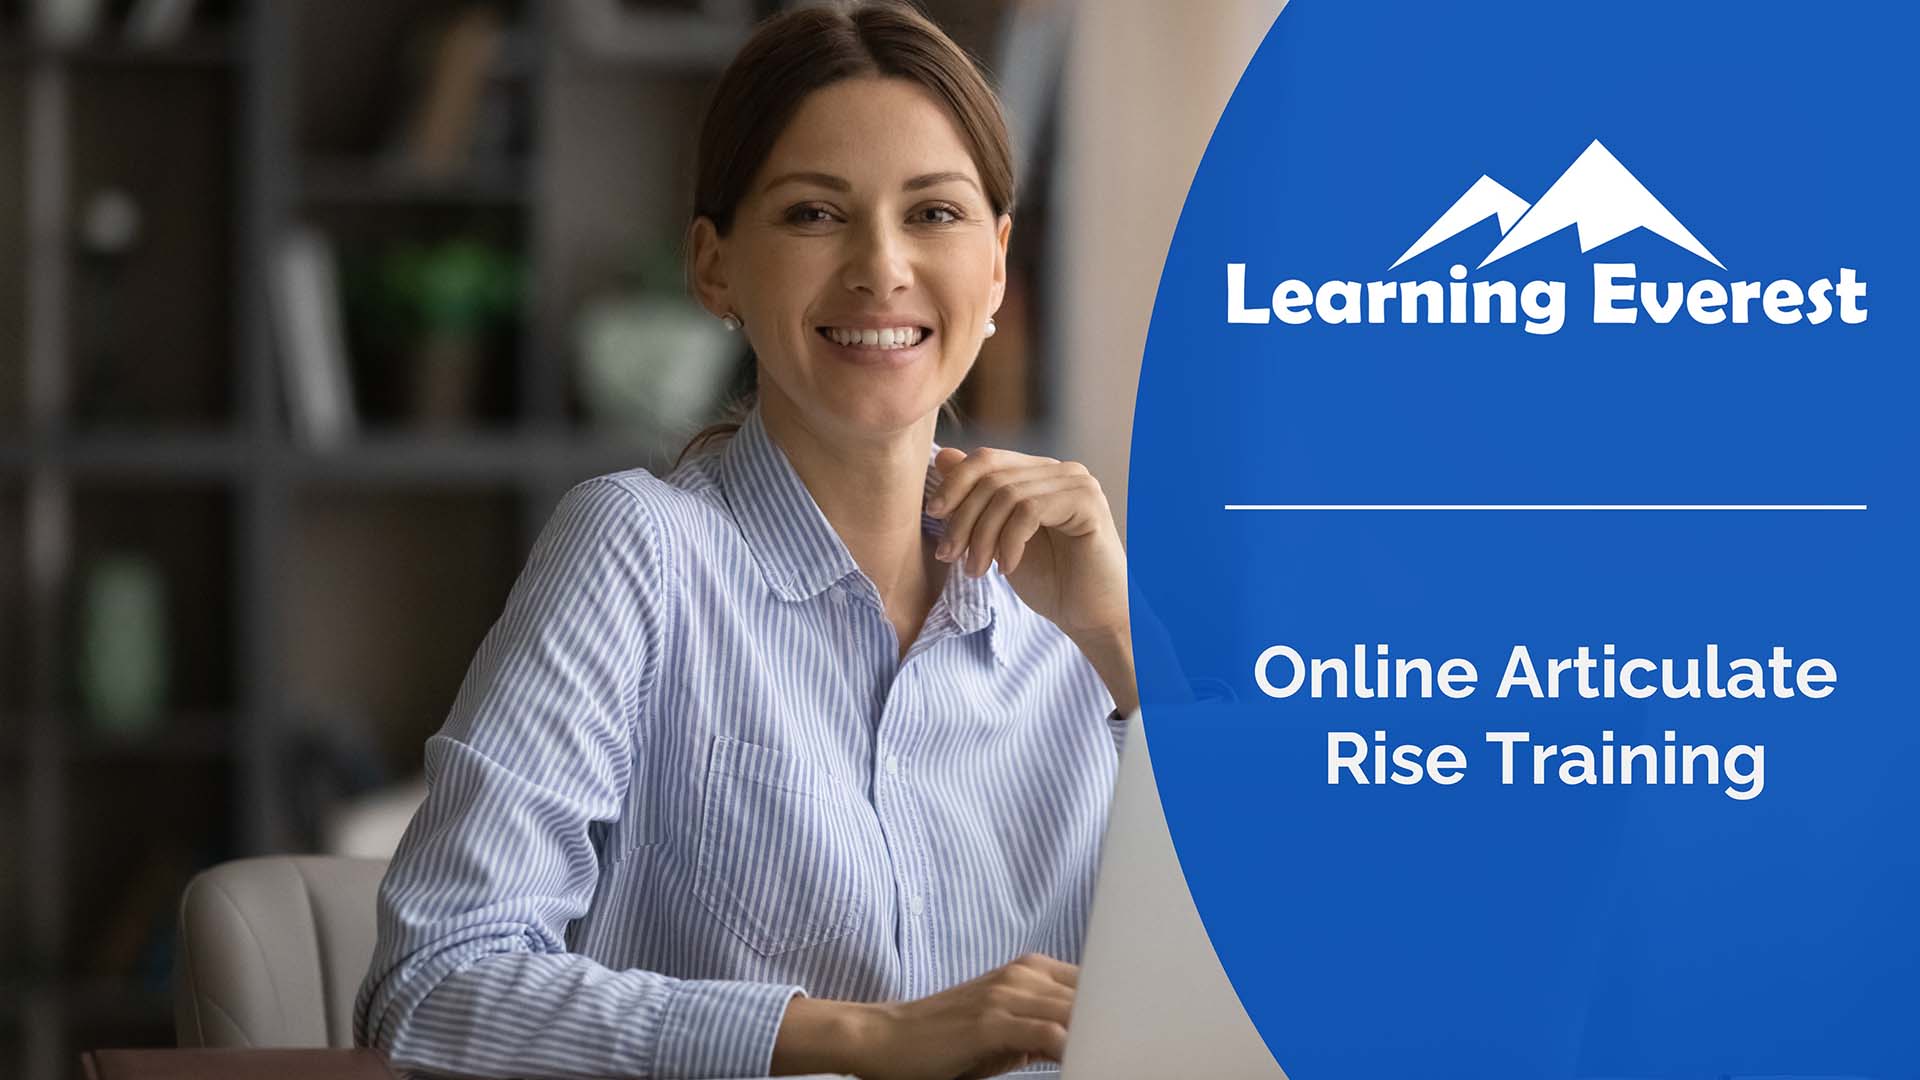 Online Articulate Rise Training